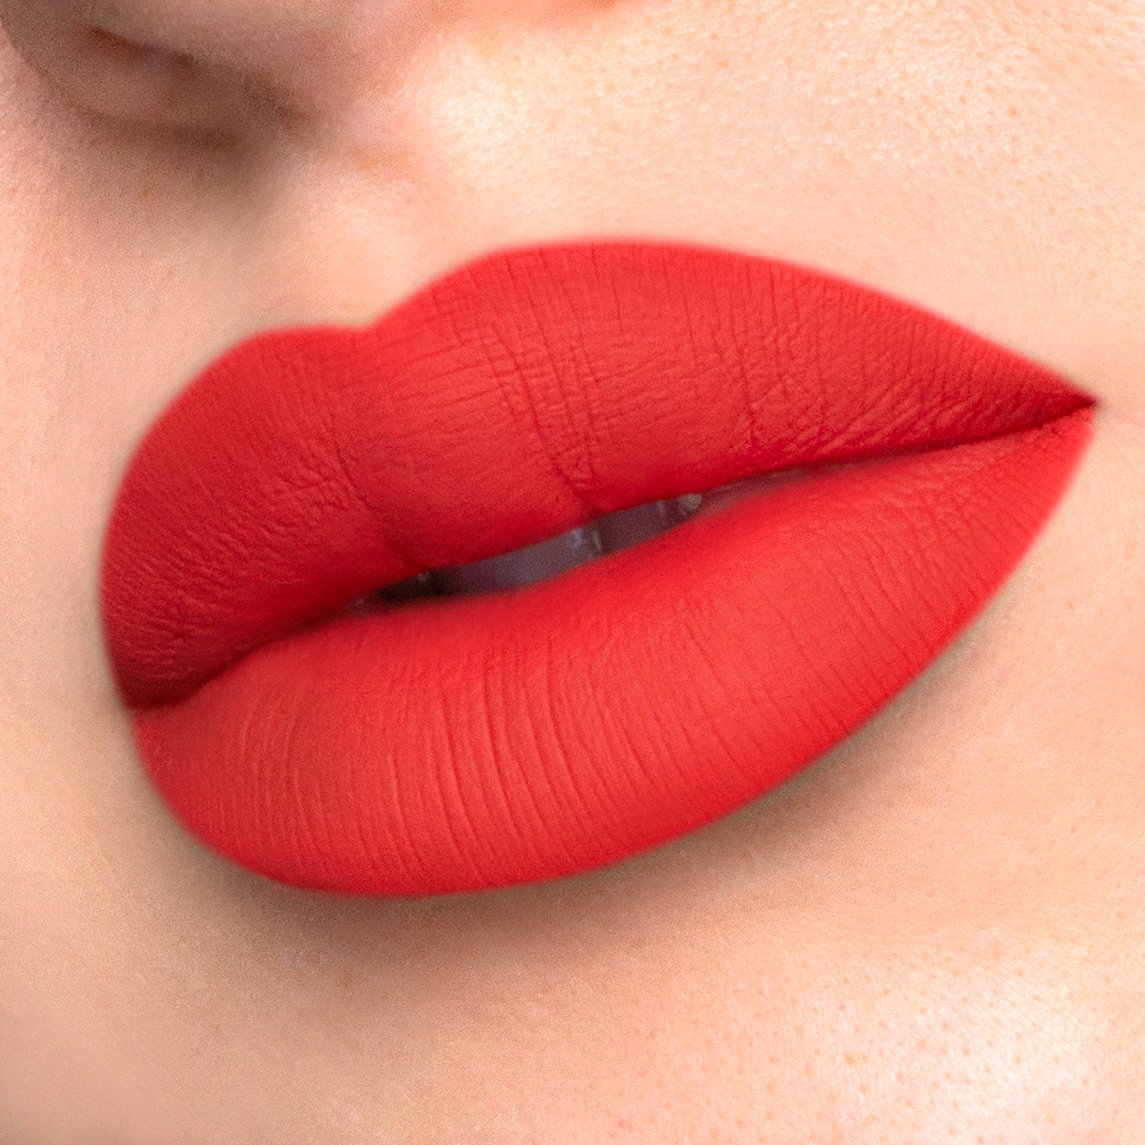 Divine a deep rich coral liquid lipstick swatched on model.